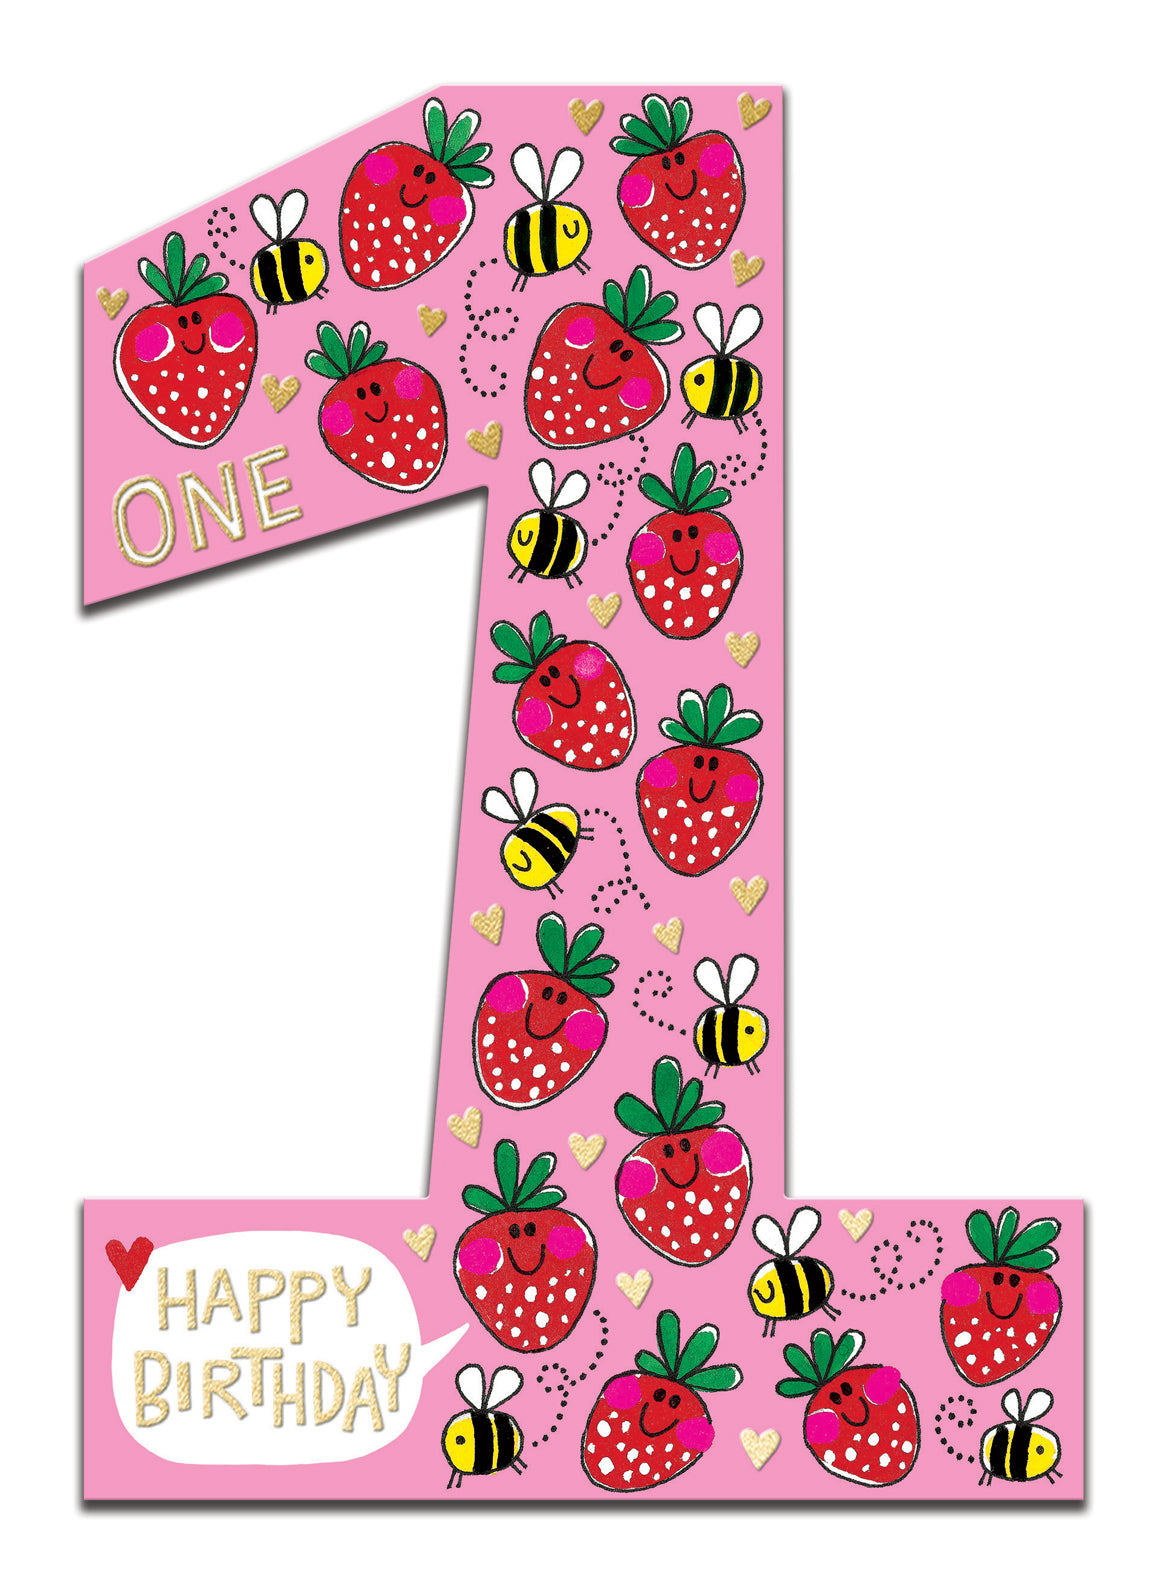 Age 1 Strawberries Cut Out Birthday Card from Penny Black